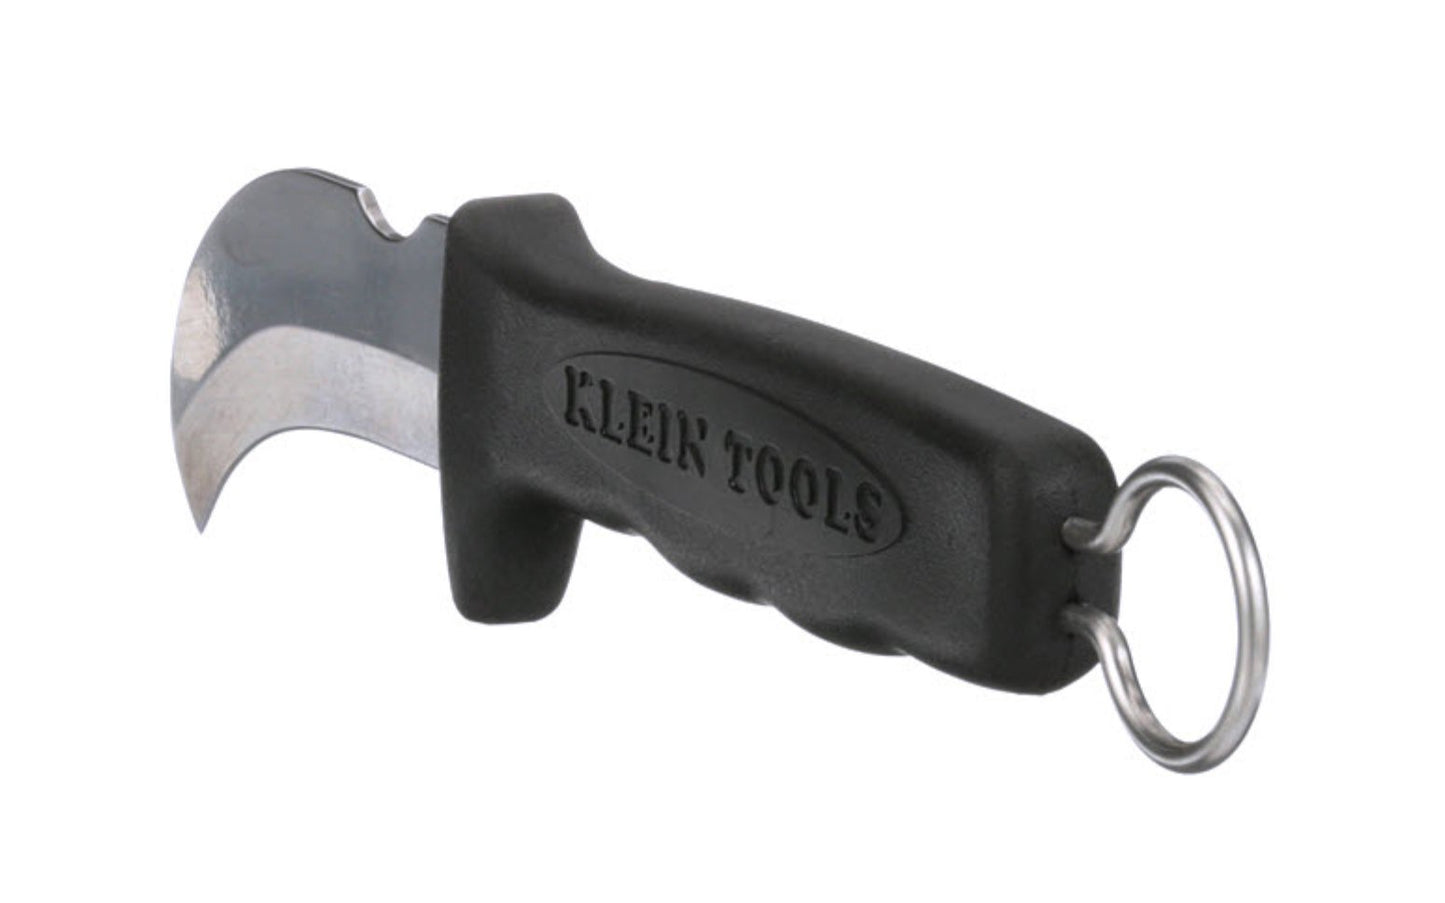 Klein Tools - Model 1570-3 - Made in USA - Klein Tools Lineman Knife - 3" steel blade withstands frequent scoring & slitting of cable jacket - Notch on blade back for scraping or removing wire insulation - stainless steel ring on the back of the handle - Cable Lineman's Skinning Knife - Heavy Duty Curved Steel Blade - 092644441202